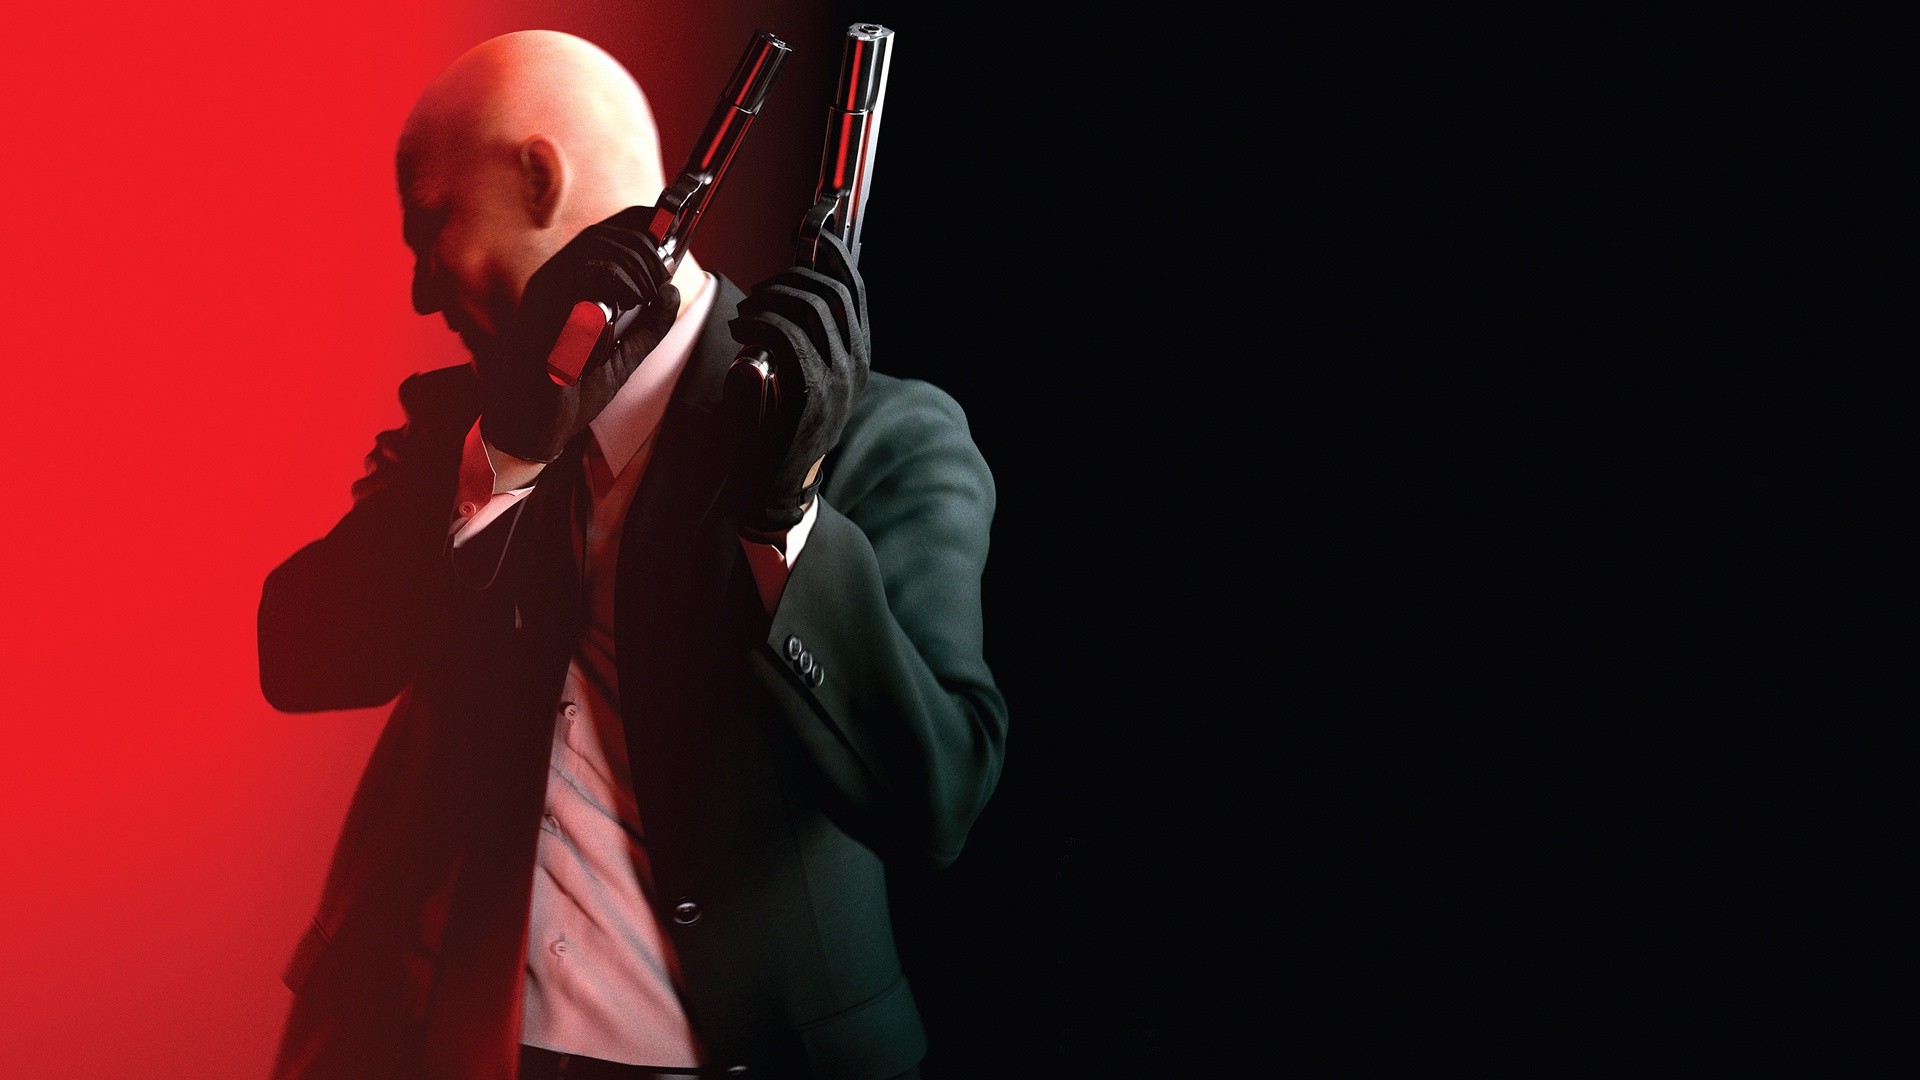 hitman absolution full game download